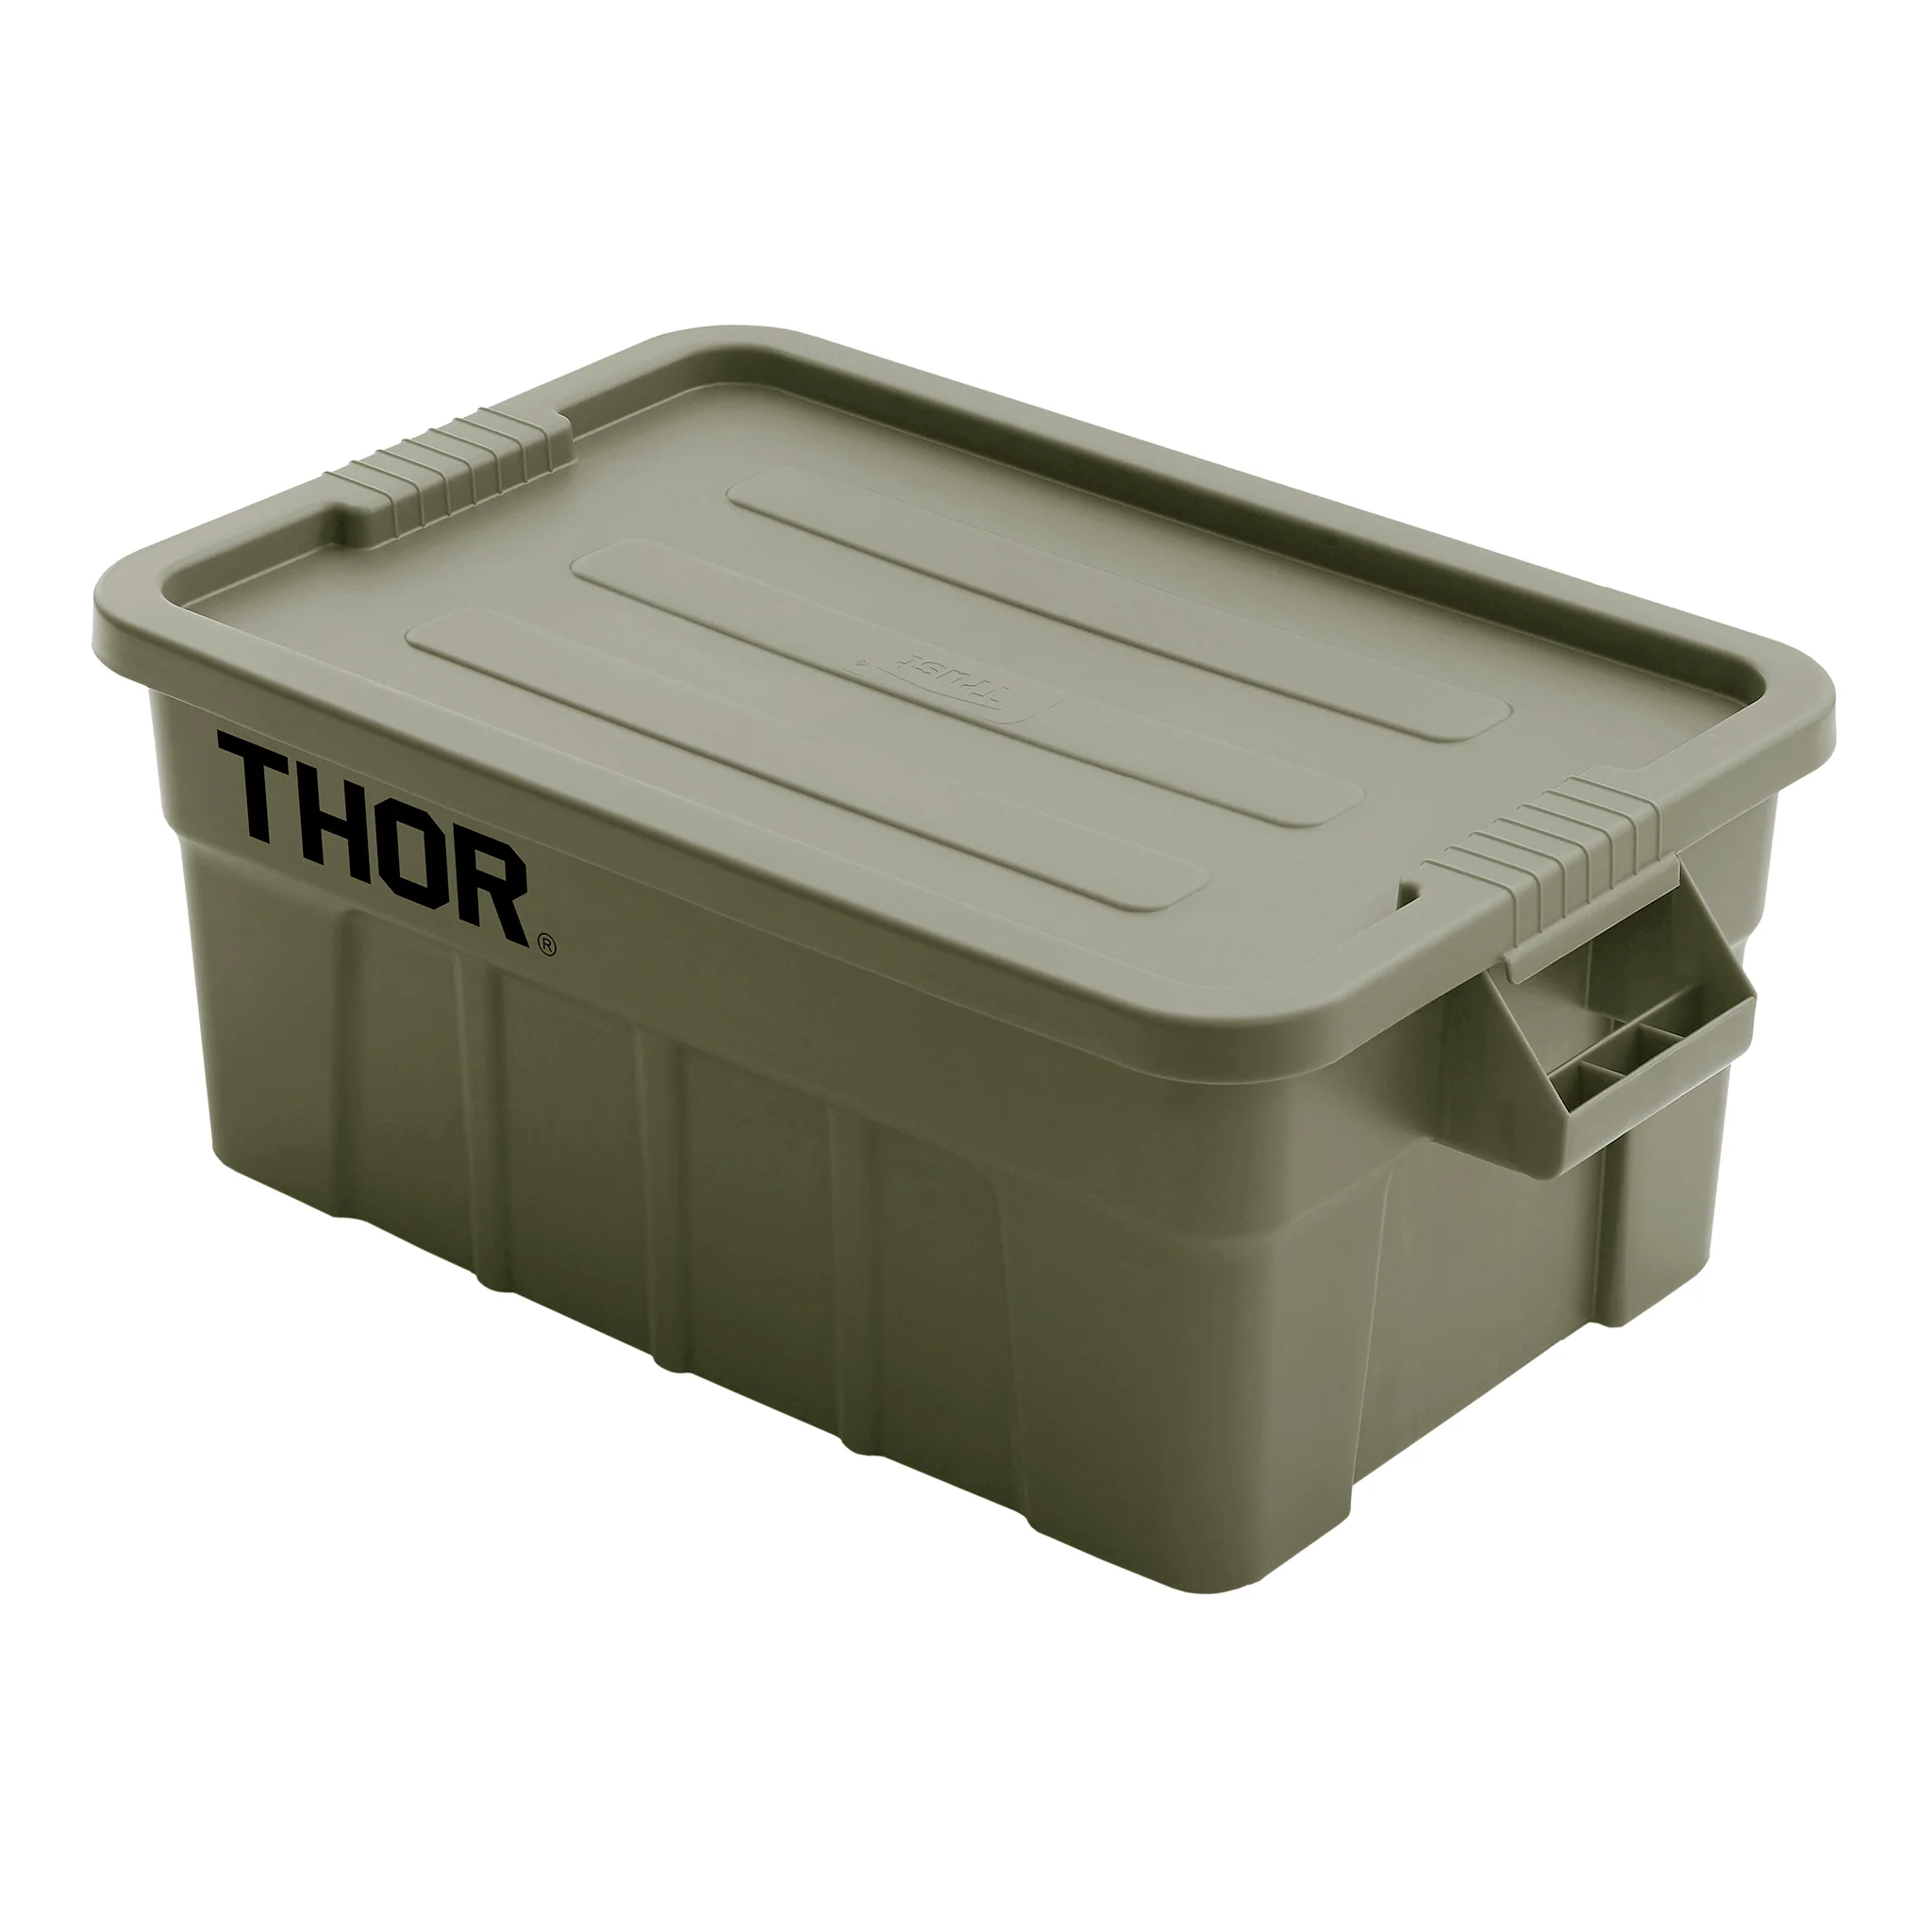 53L THOR Stackable Storage Box – Oliezi Outdoors